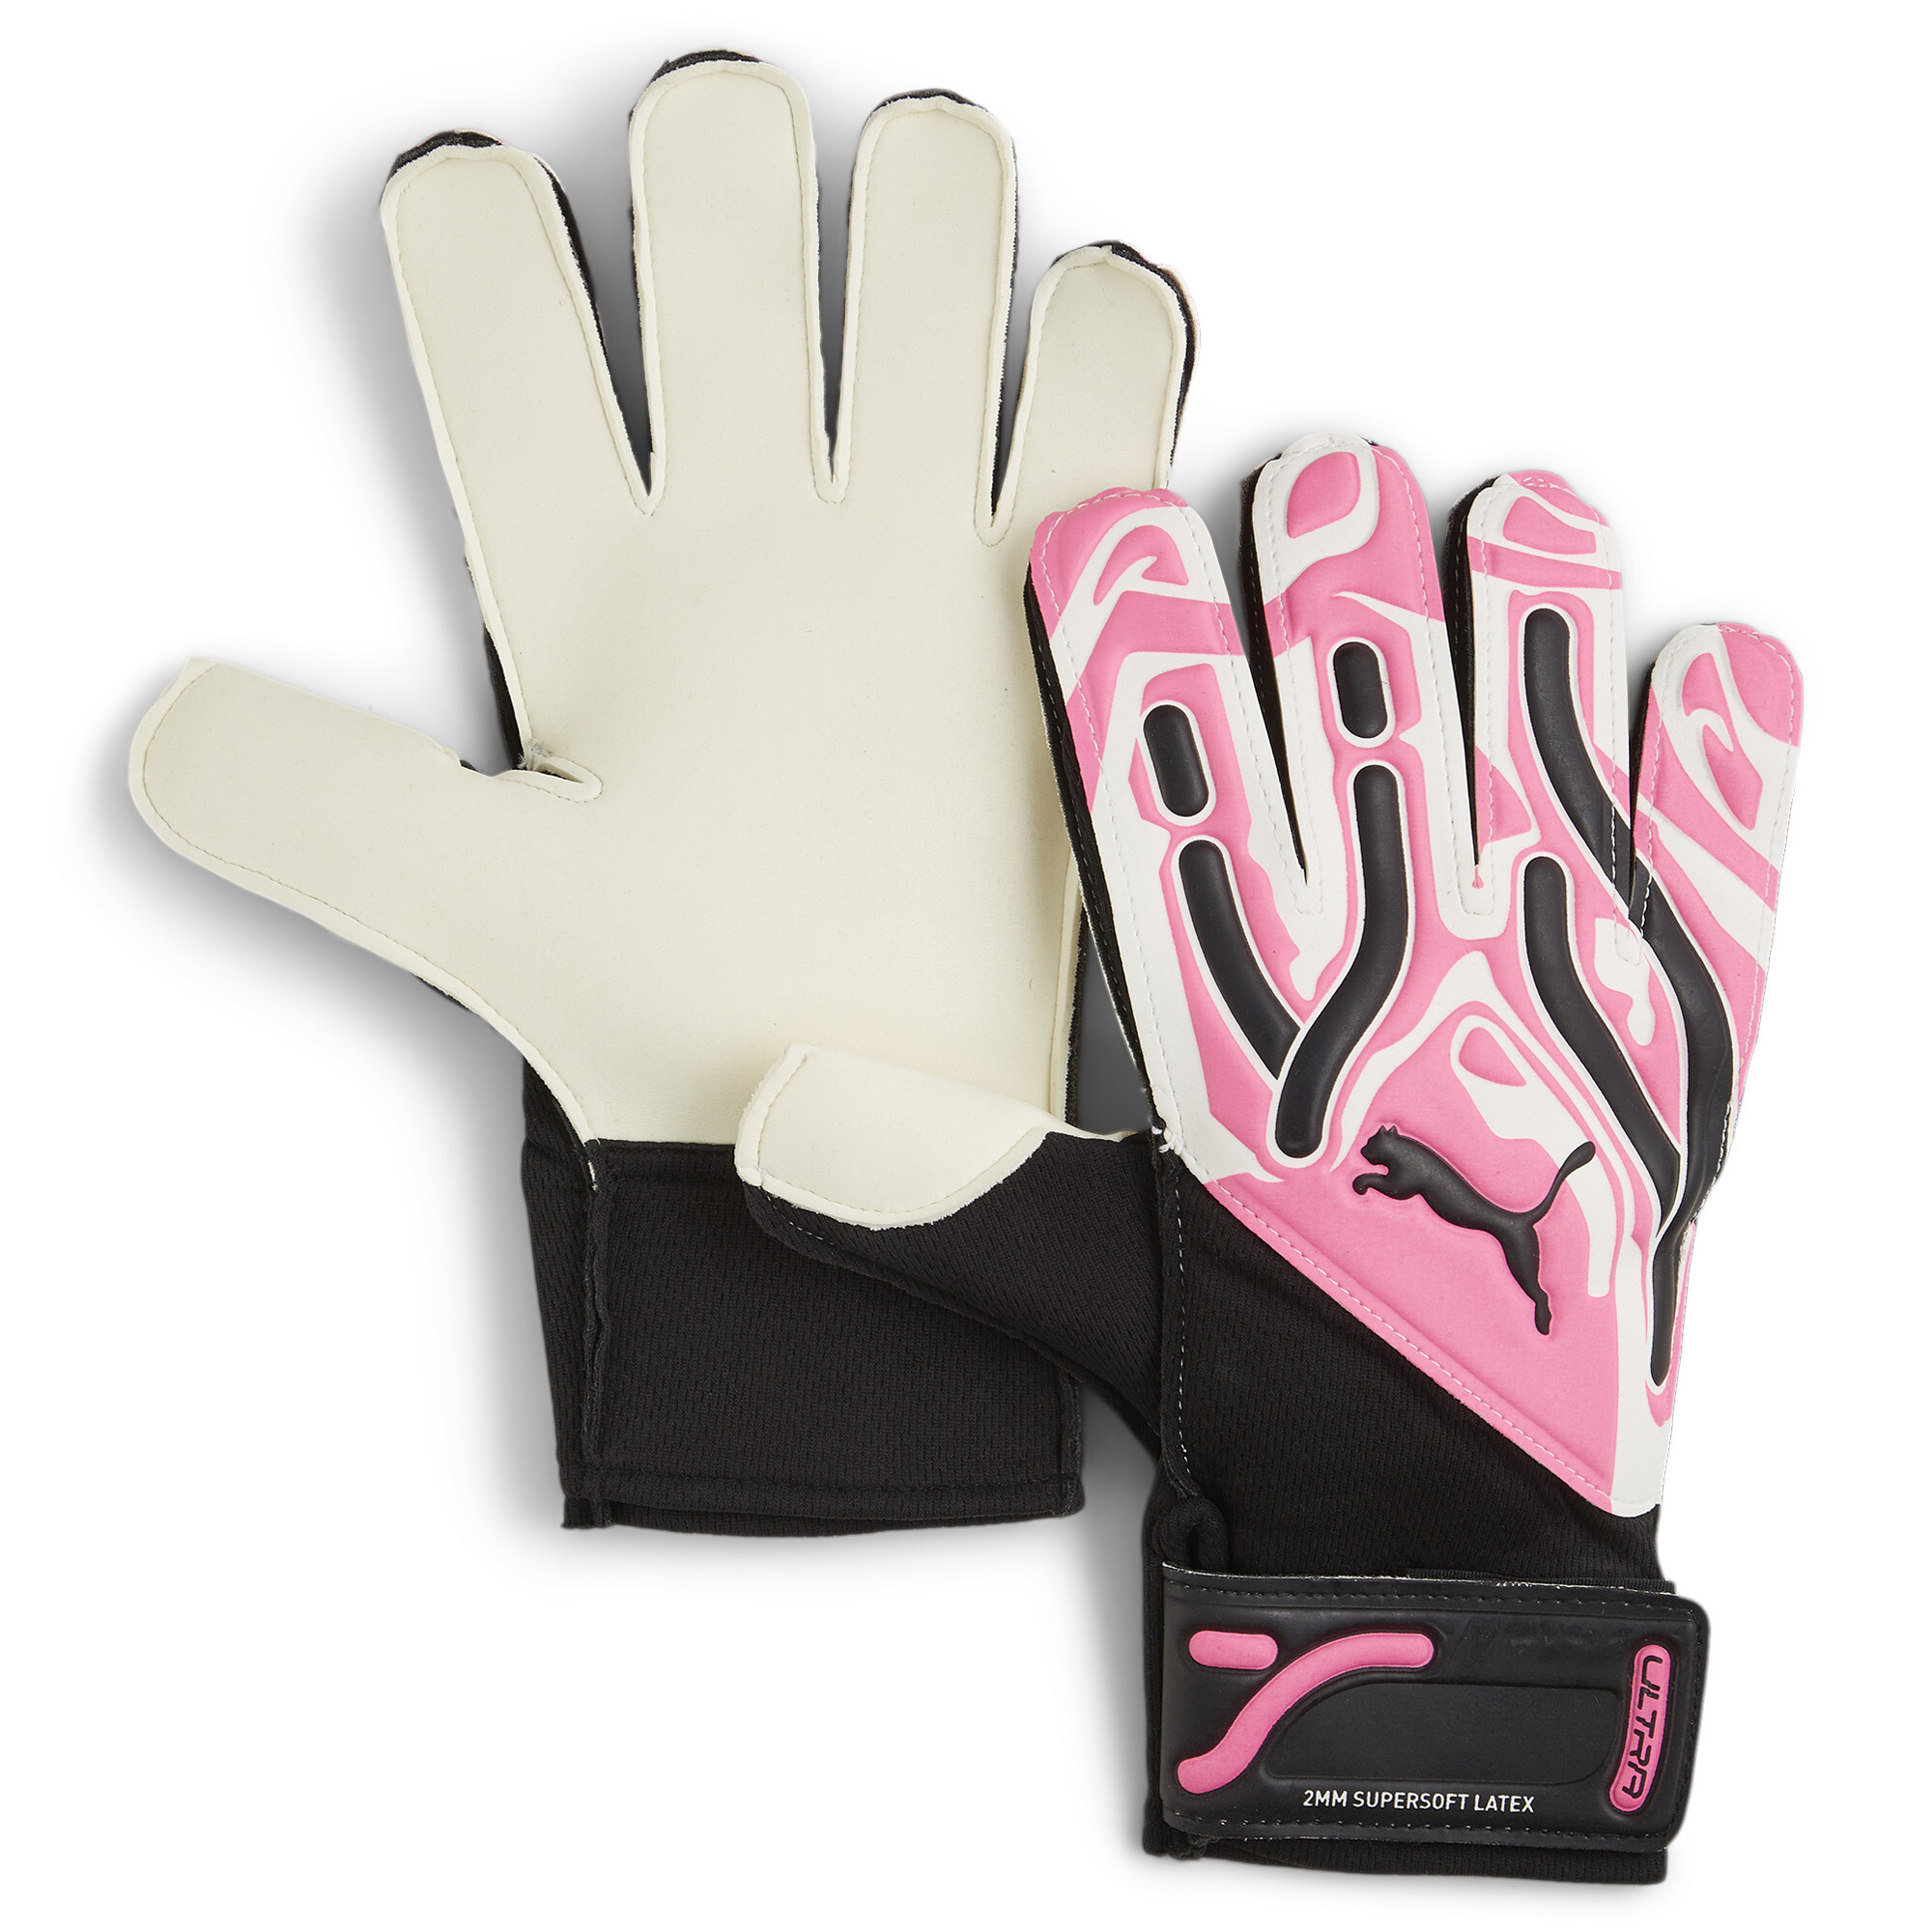 Men's PUMA ULTRA Play RC Goalkeeper Gloves In Pink, Size UK 4